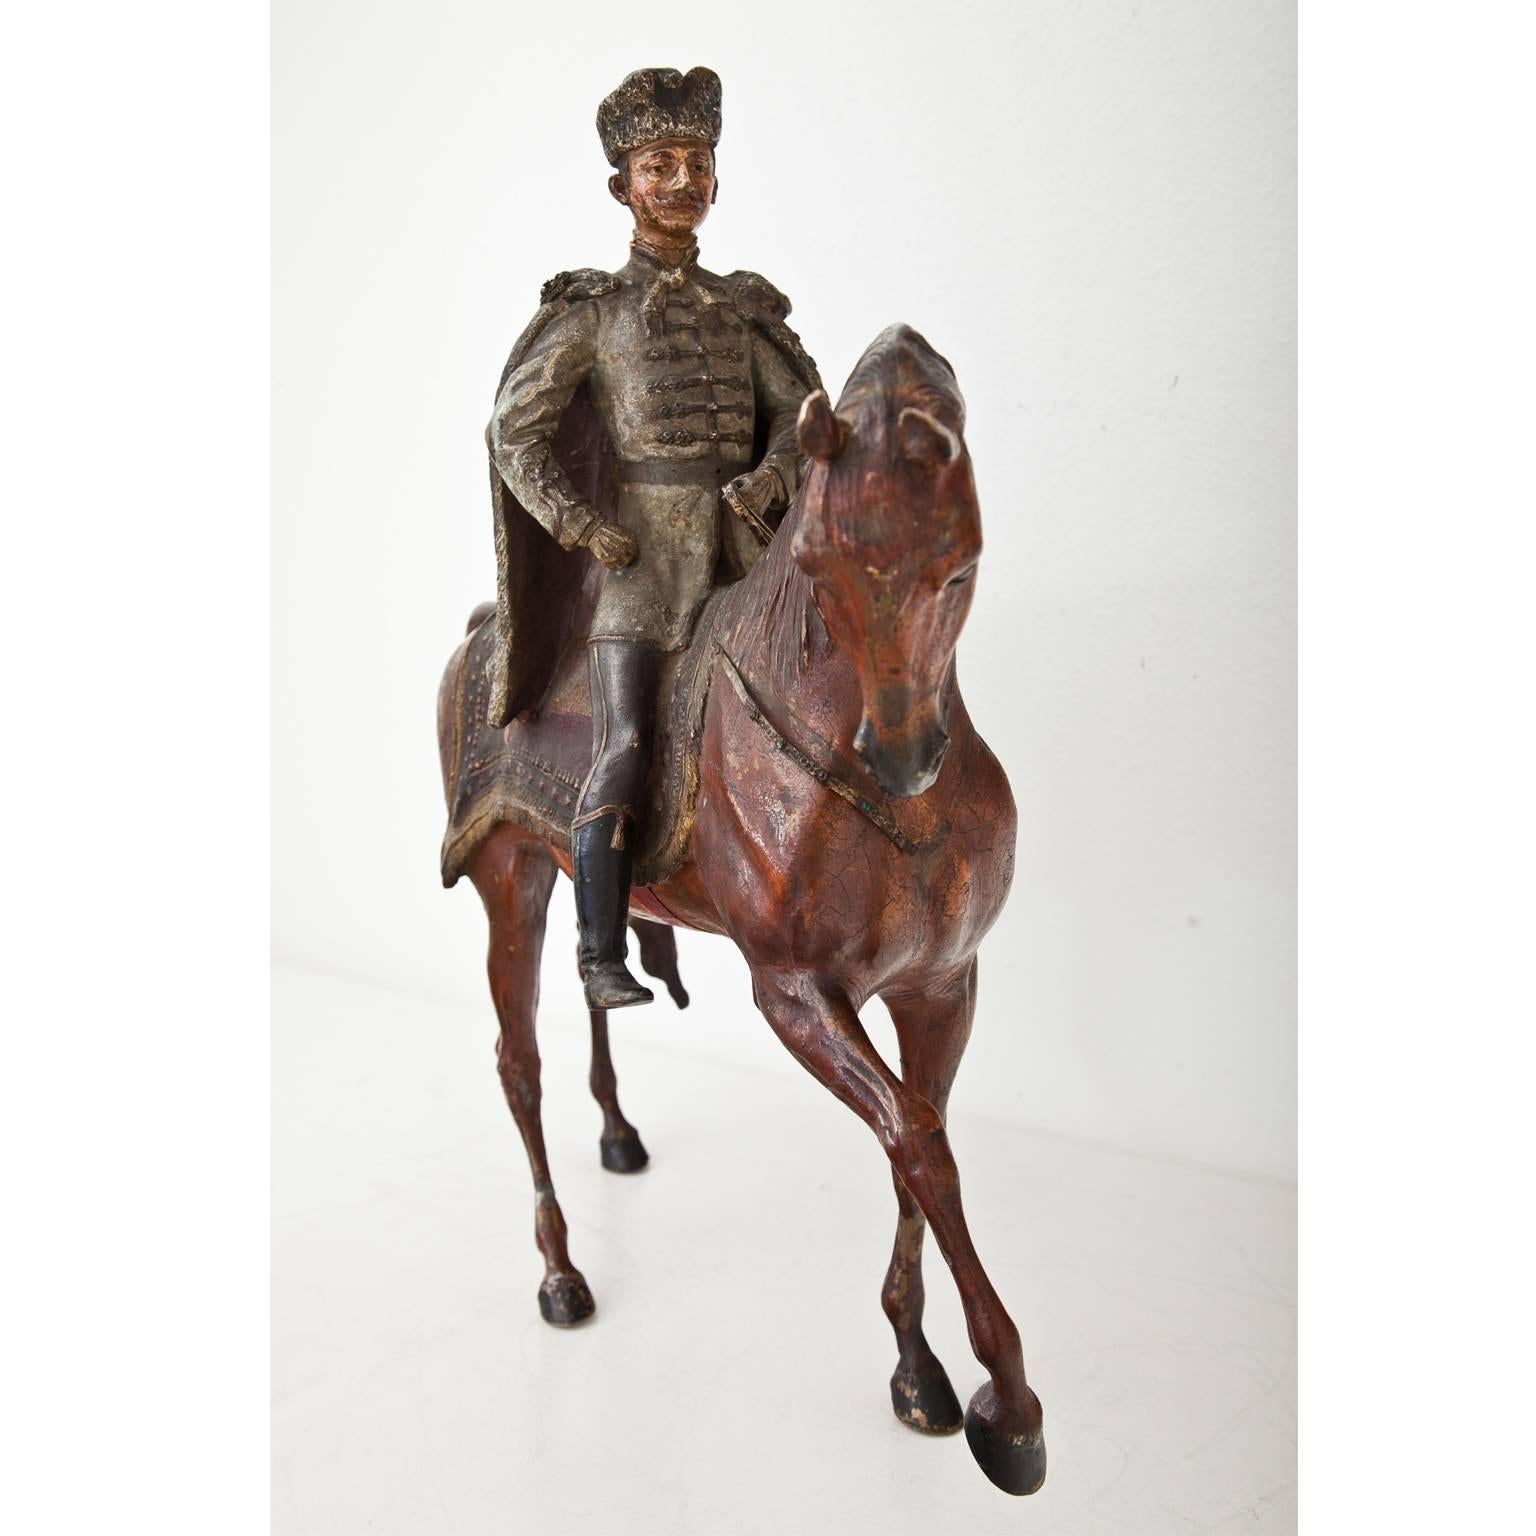 Viennese Bronze Hussar in an absolut unusal size on a striding horse. The bridle is decorated with small glass cabochons. The paint is original, the bronze has smaller repairs but is in an overall good condition.
On November 21, 1916 Emperor Franz